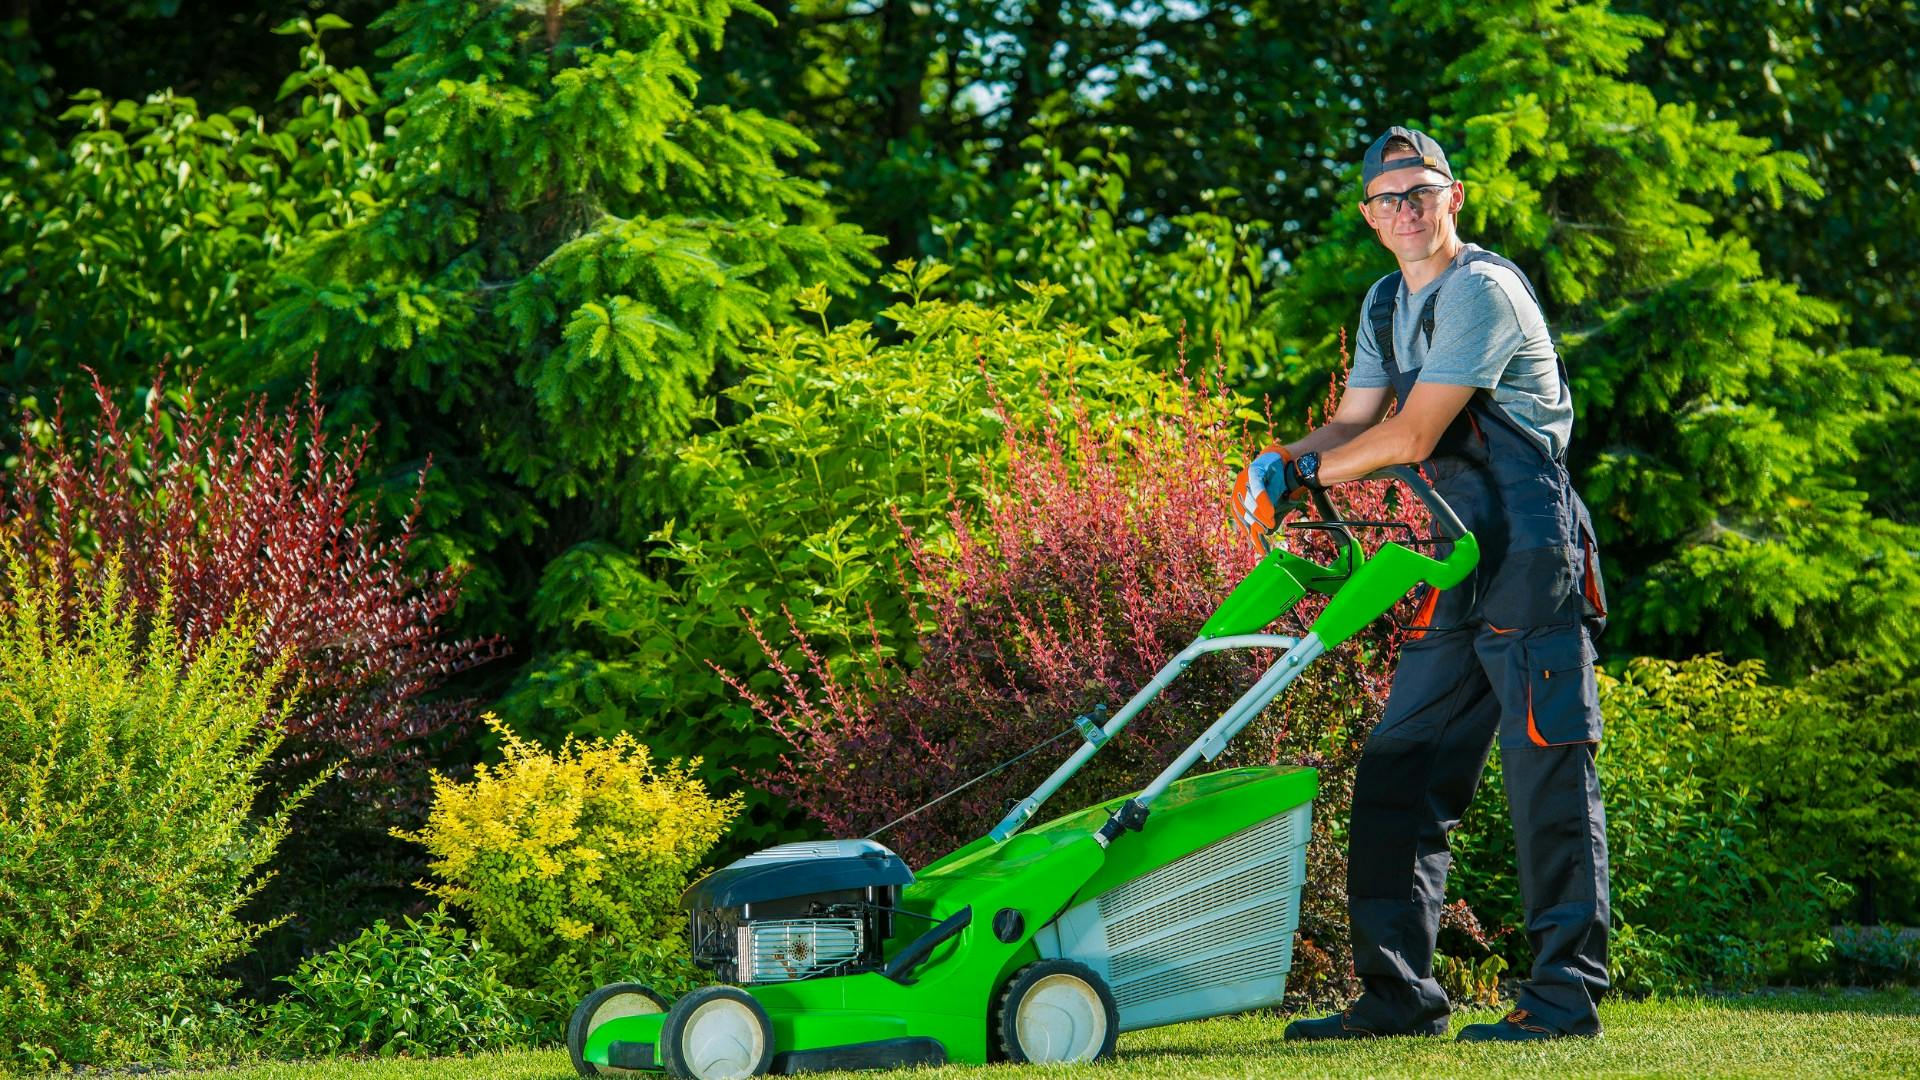 Lawn care employee leaning on lawn mower and smiling